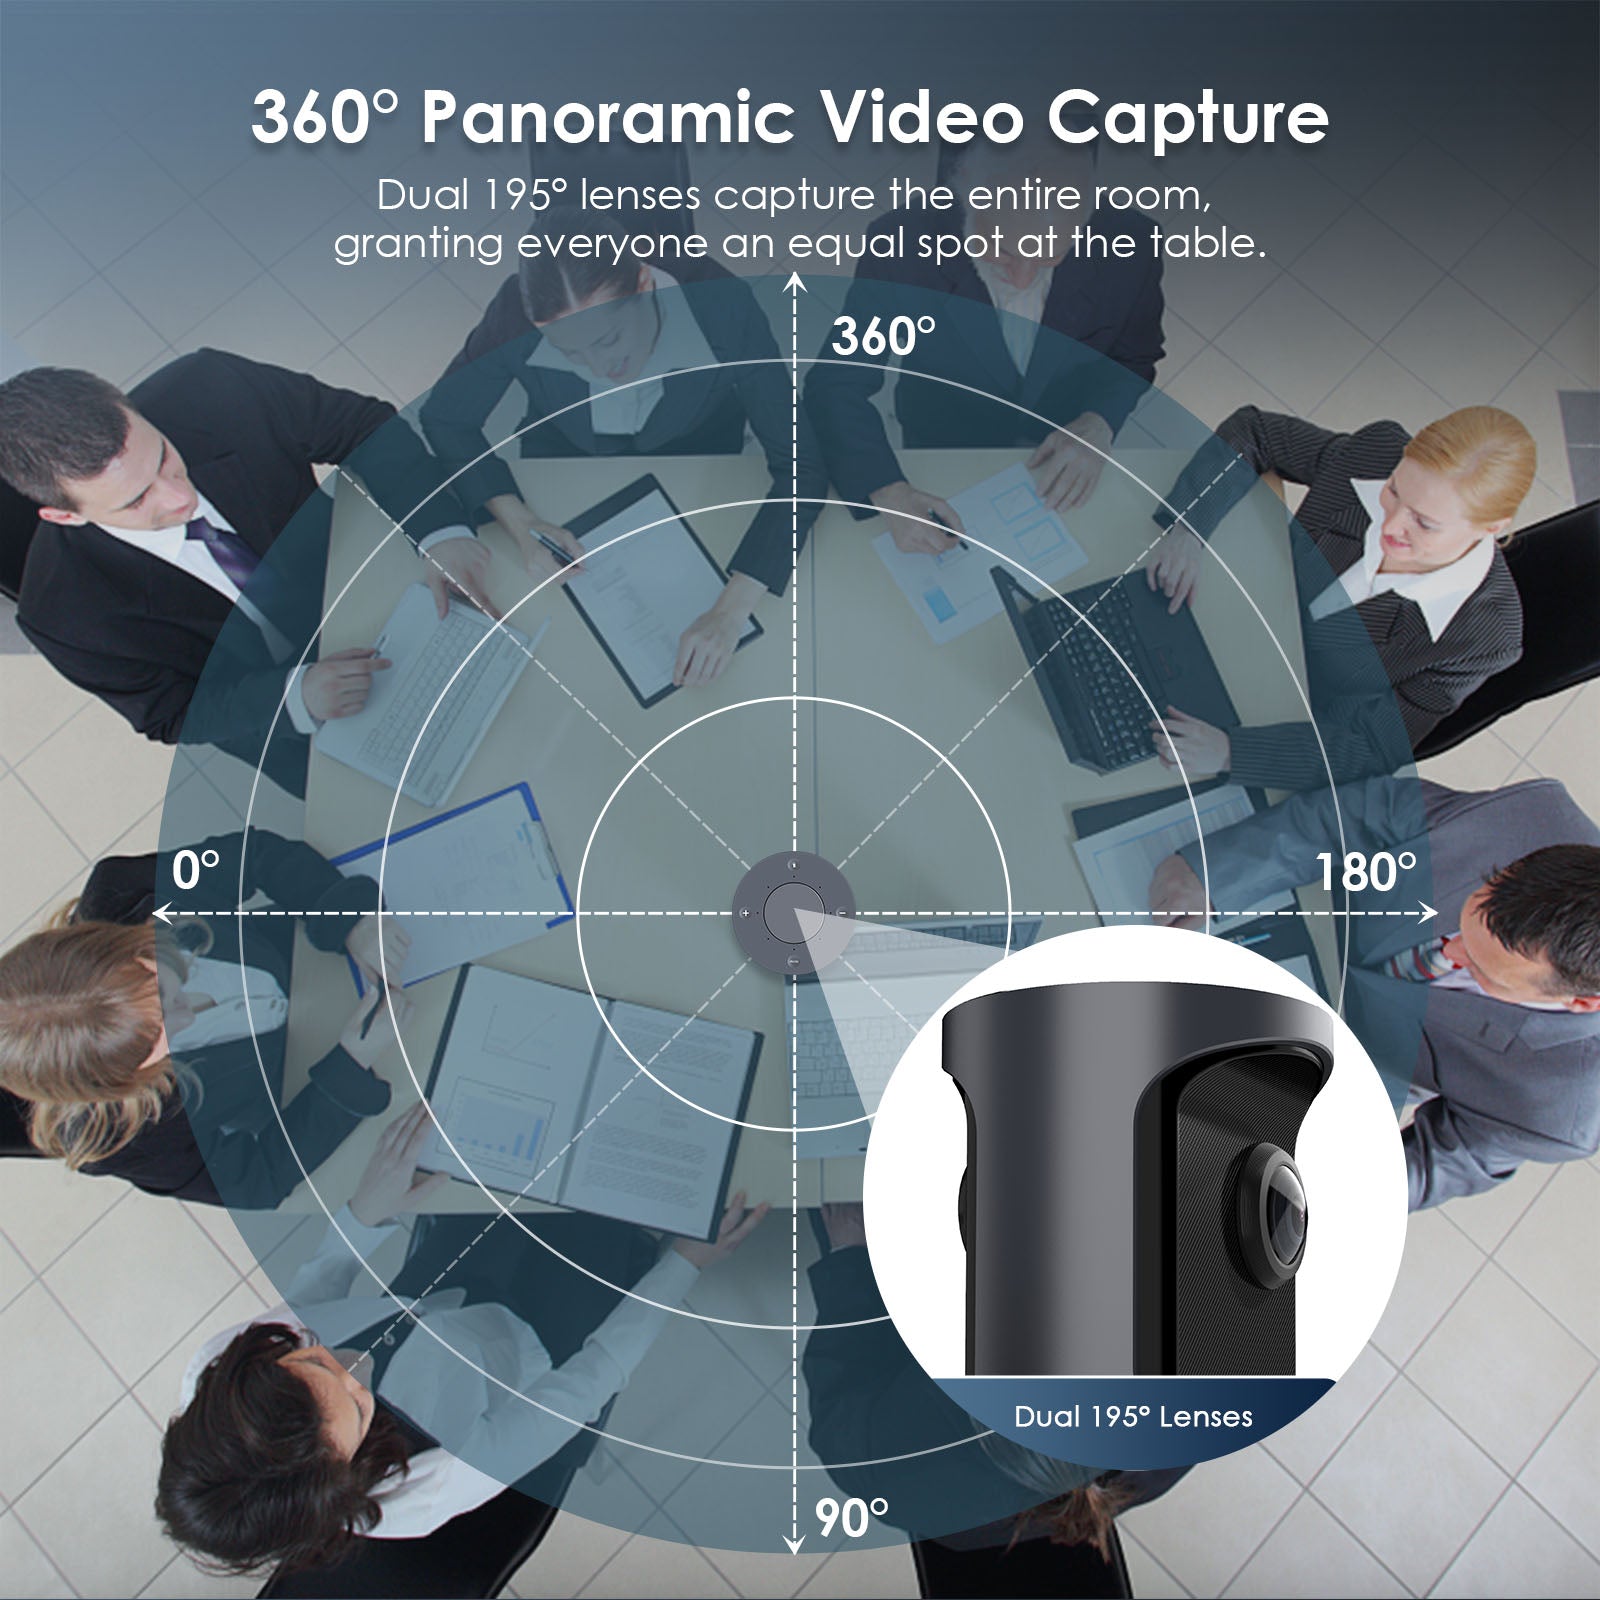 Conference Camera with dual 195° lenses covers every attendee in small roundtable meetings.